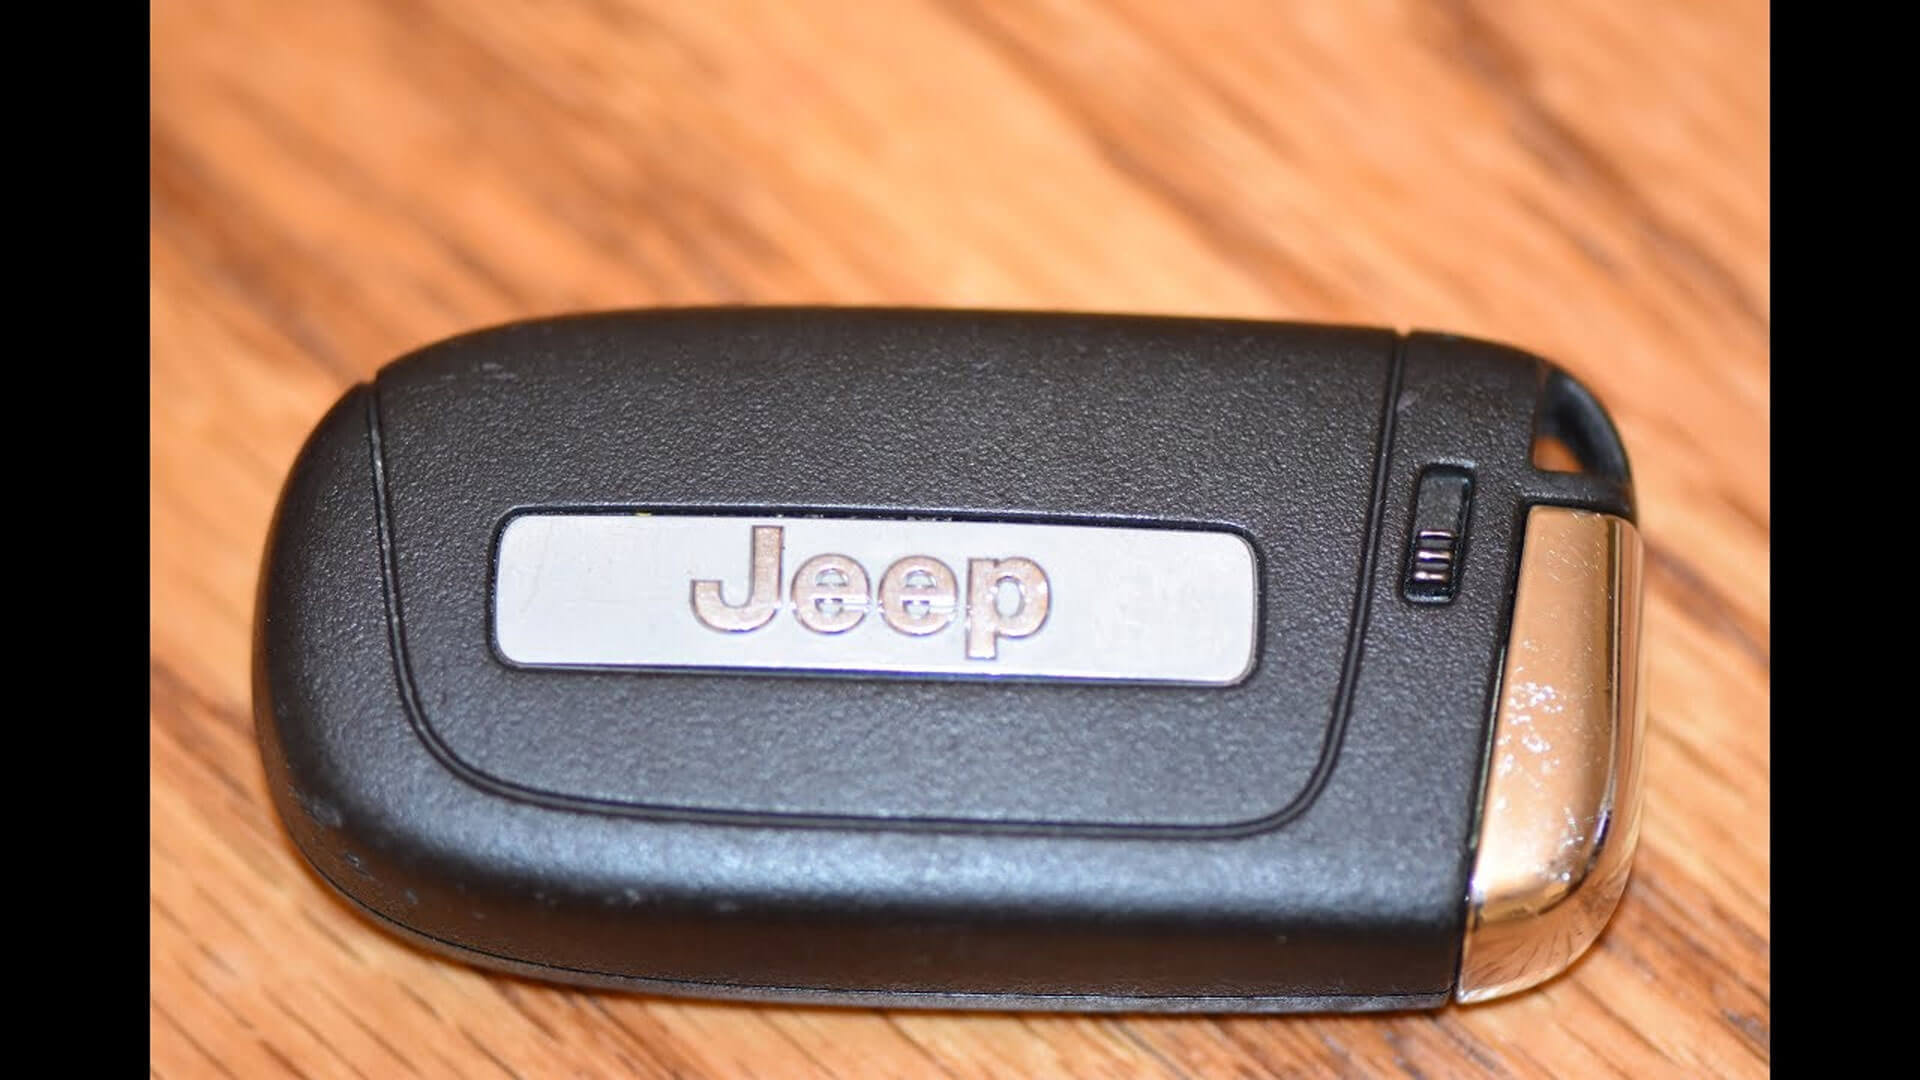 How to Change Battery in 2020 Jeep Compass Key Fob